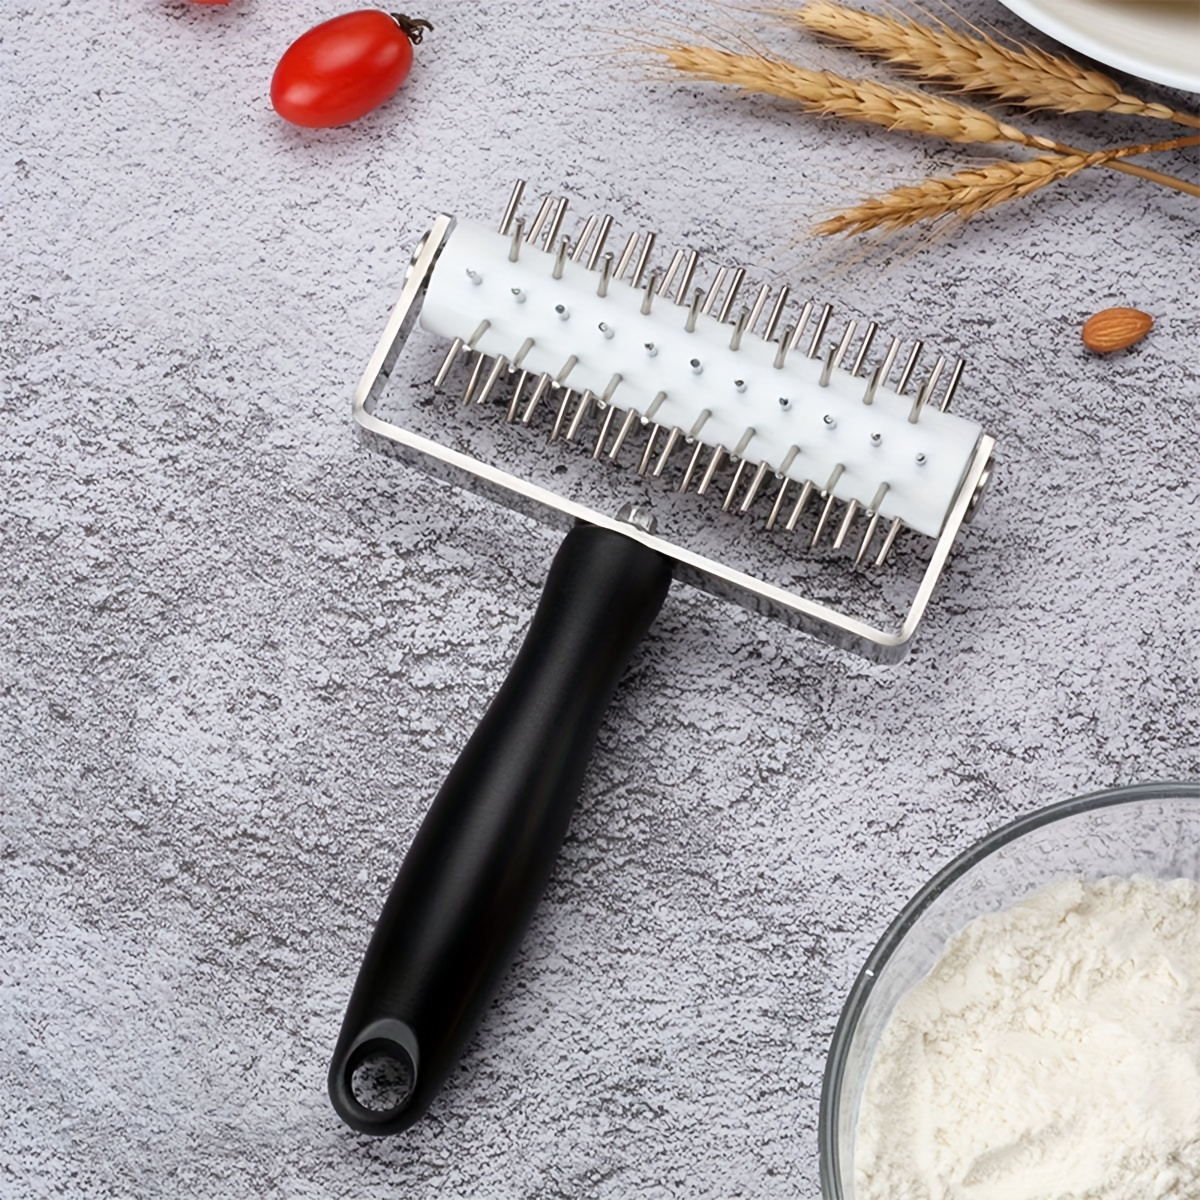 Pizza Pie Pastry Dough Roller  Stainless Steel Rolling Tools